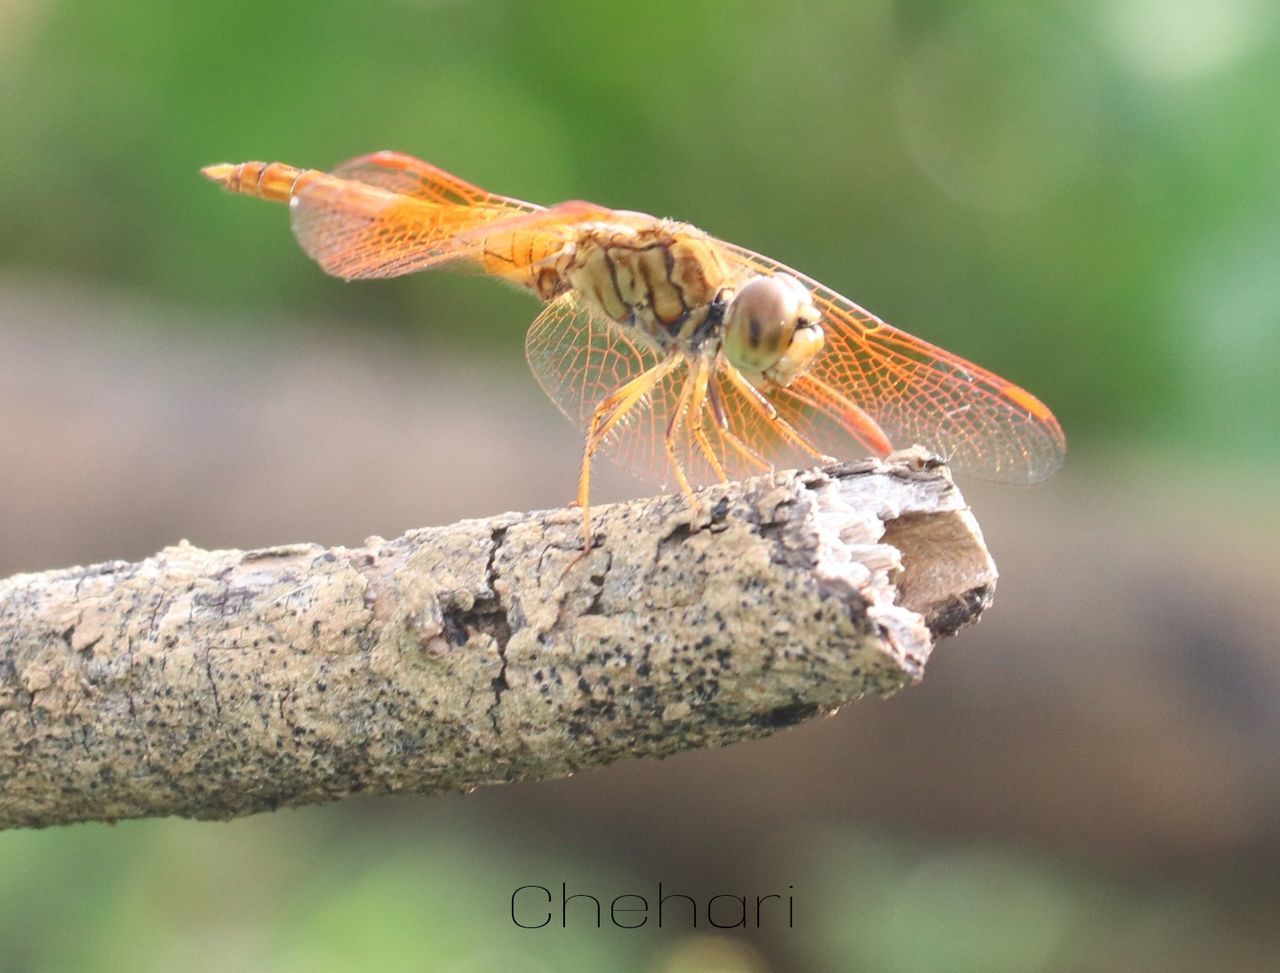 animal themes, animal, animal wildlife, one animal, wildlife, insect, macro photography, nature, close-up, focus on foreground, animal wing, perching, dragonflies and damseflies, tree, branch, no people, outdoors, dragonfly, animal body part, plant, beauty in nature, side view, full length, day, magnification, environment, macro